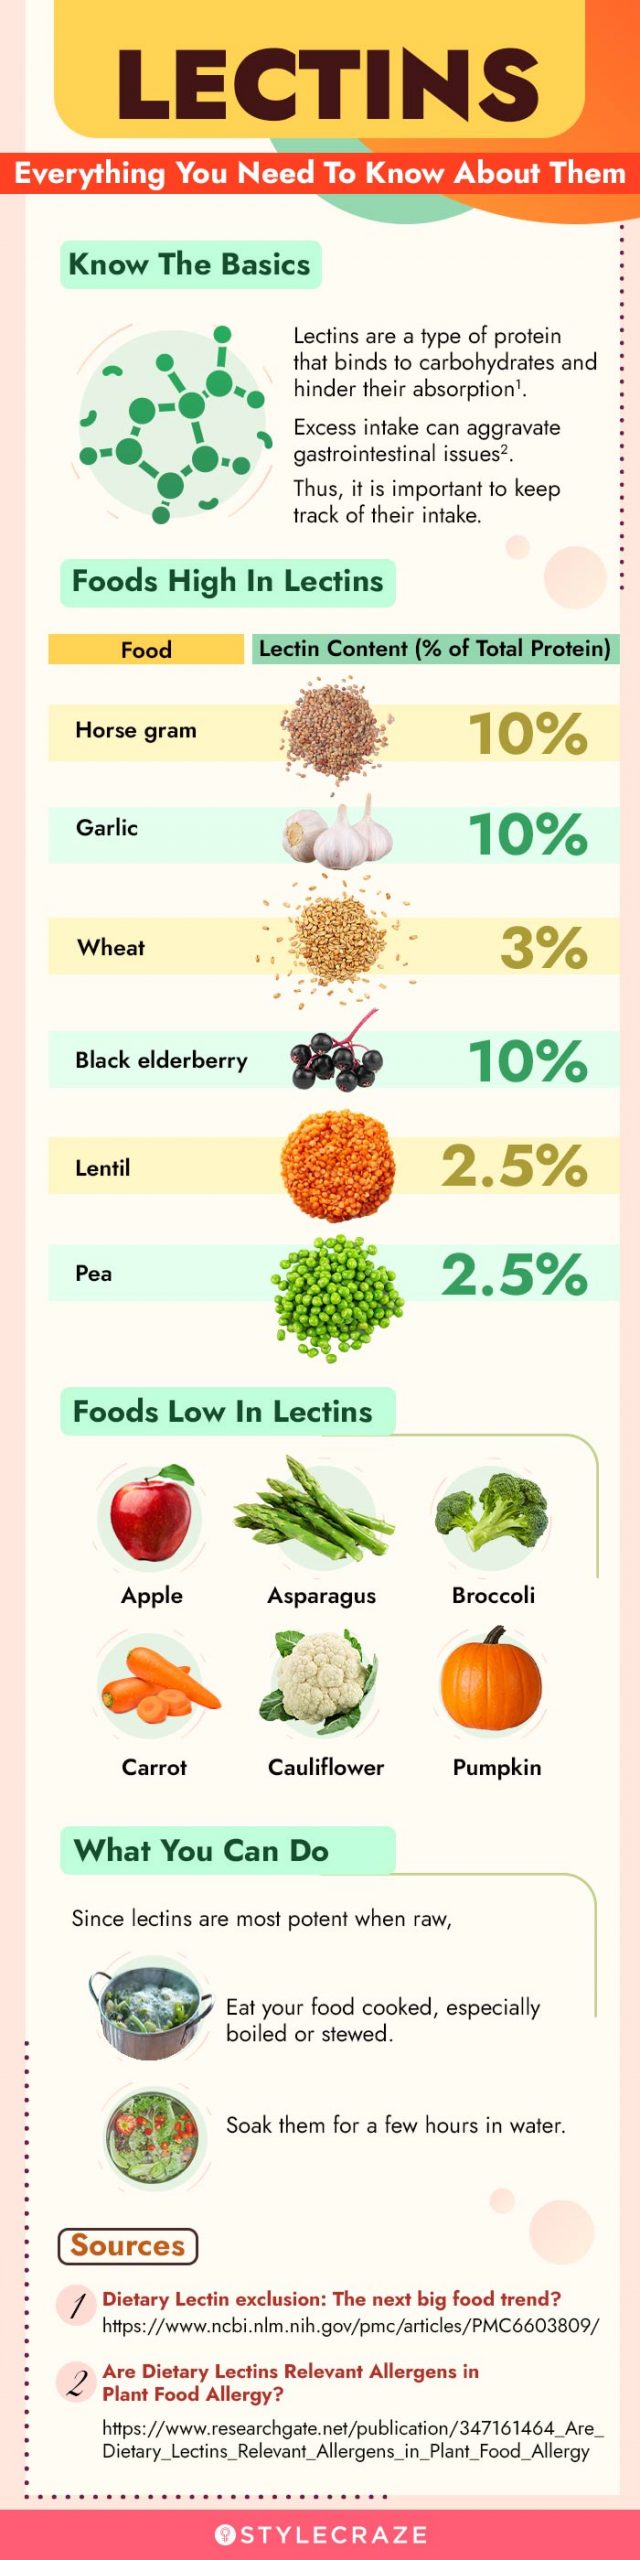 everything you need to know about lectins (infographic)